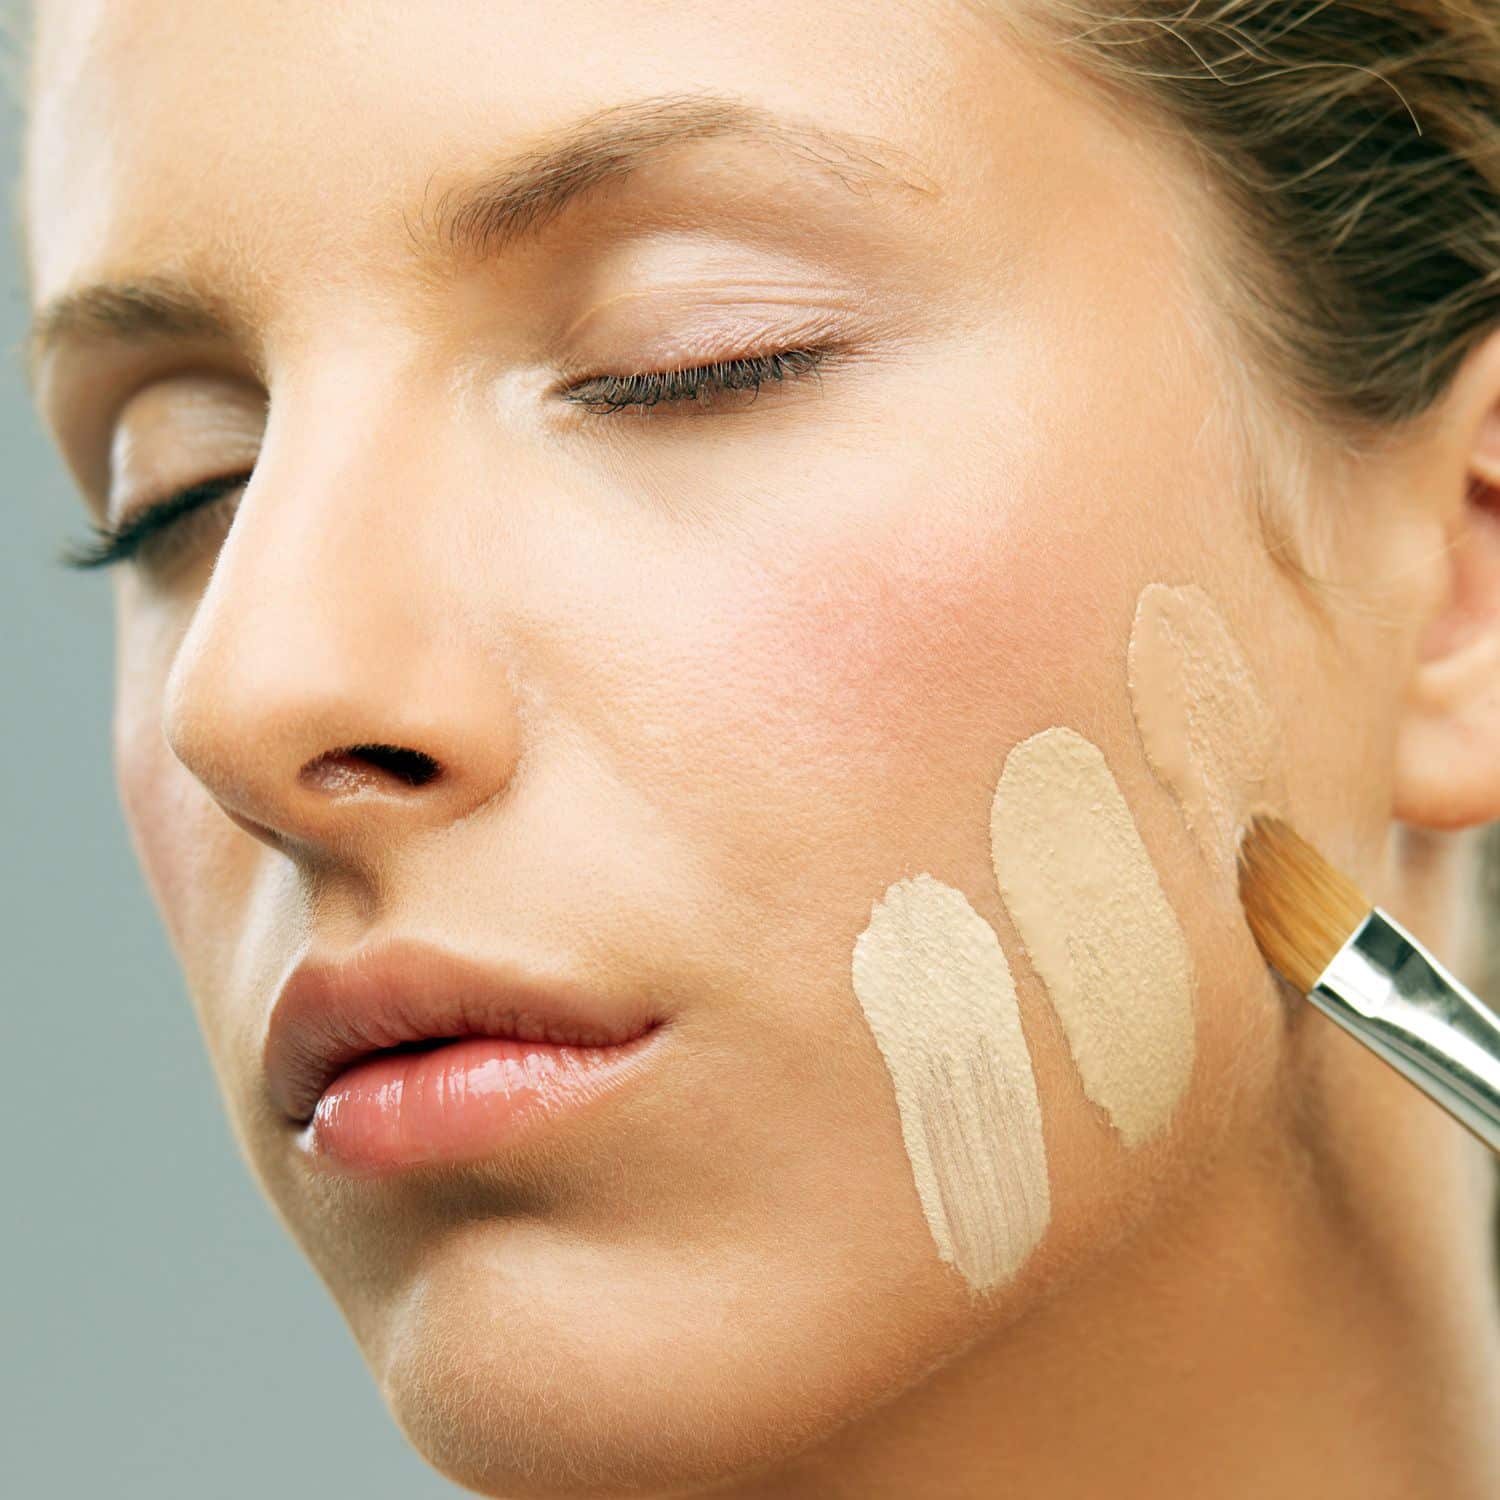 How to Choose Makeup for Your Skin Tone